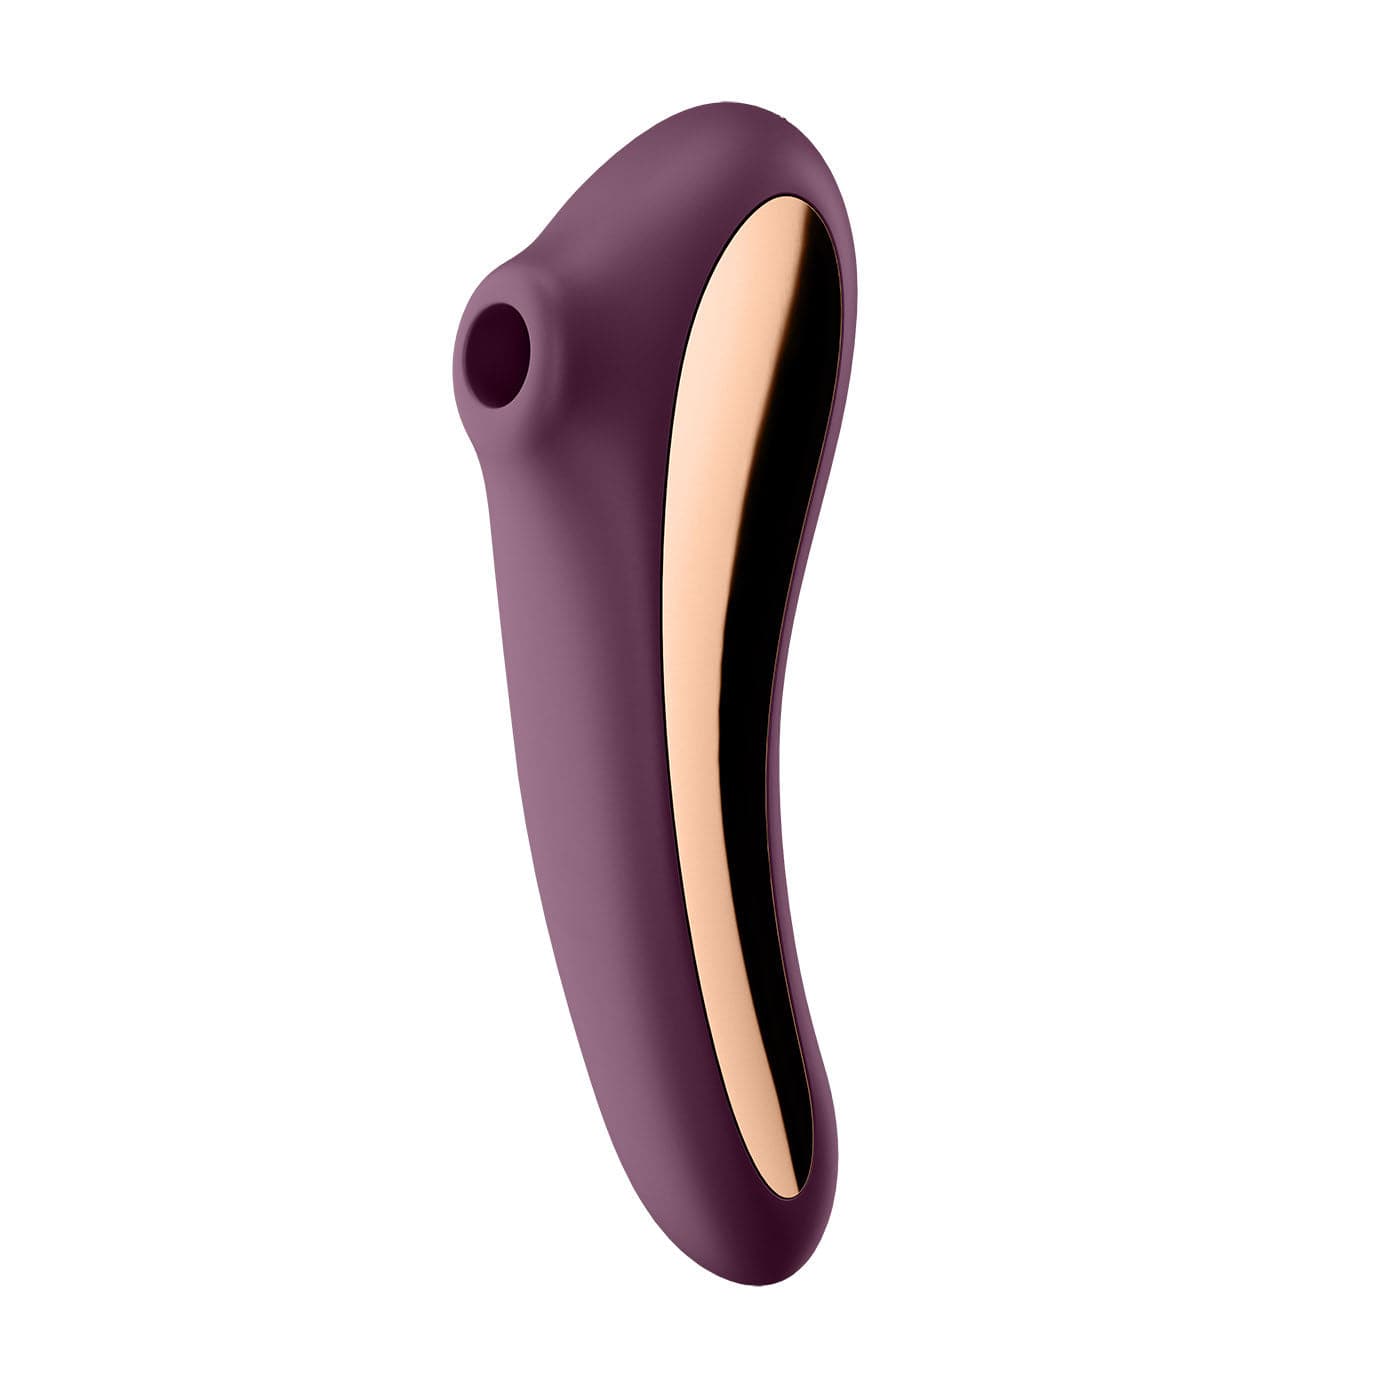 Satisfyer - Dual Kiss Insertable Air Pulse Vibrator w App-Controlled Clitoral Air Stimulator (Purple) Clit Massager (Vibration) Rechargeable 4061504003023 CherryAffairs